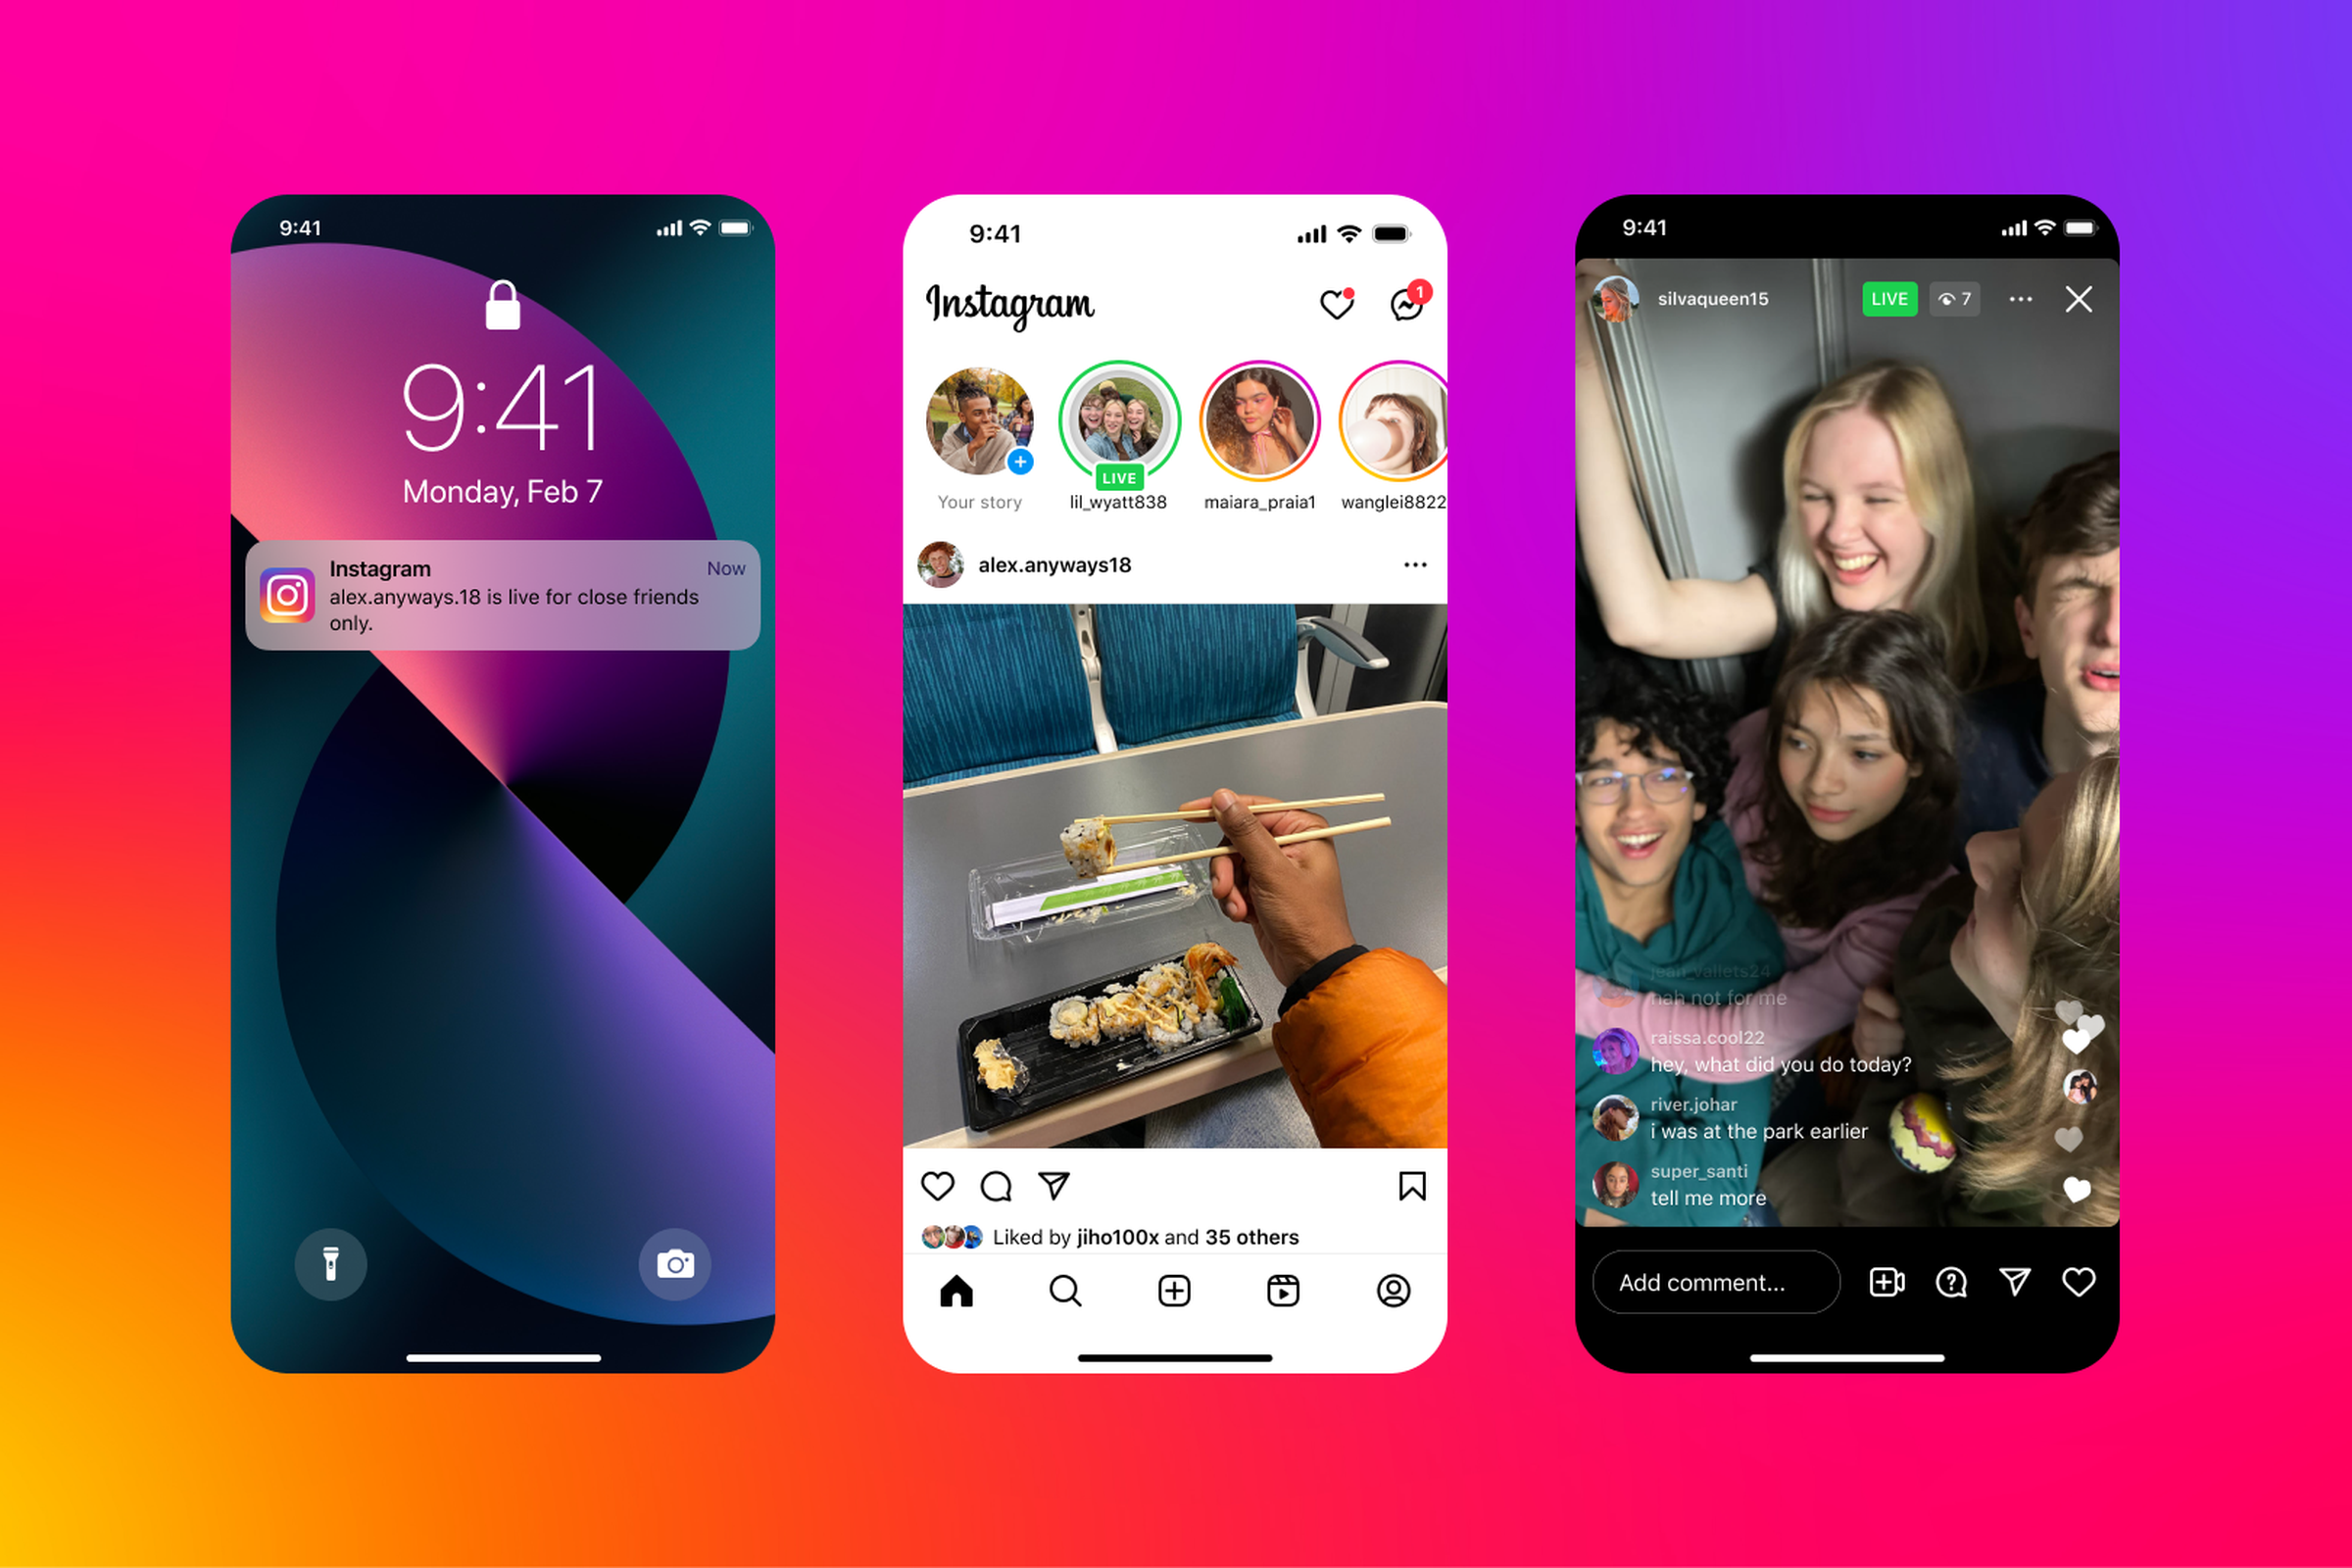 Instagram Live video stream alerts and displays for Close Friends only.